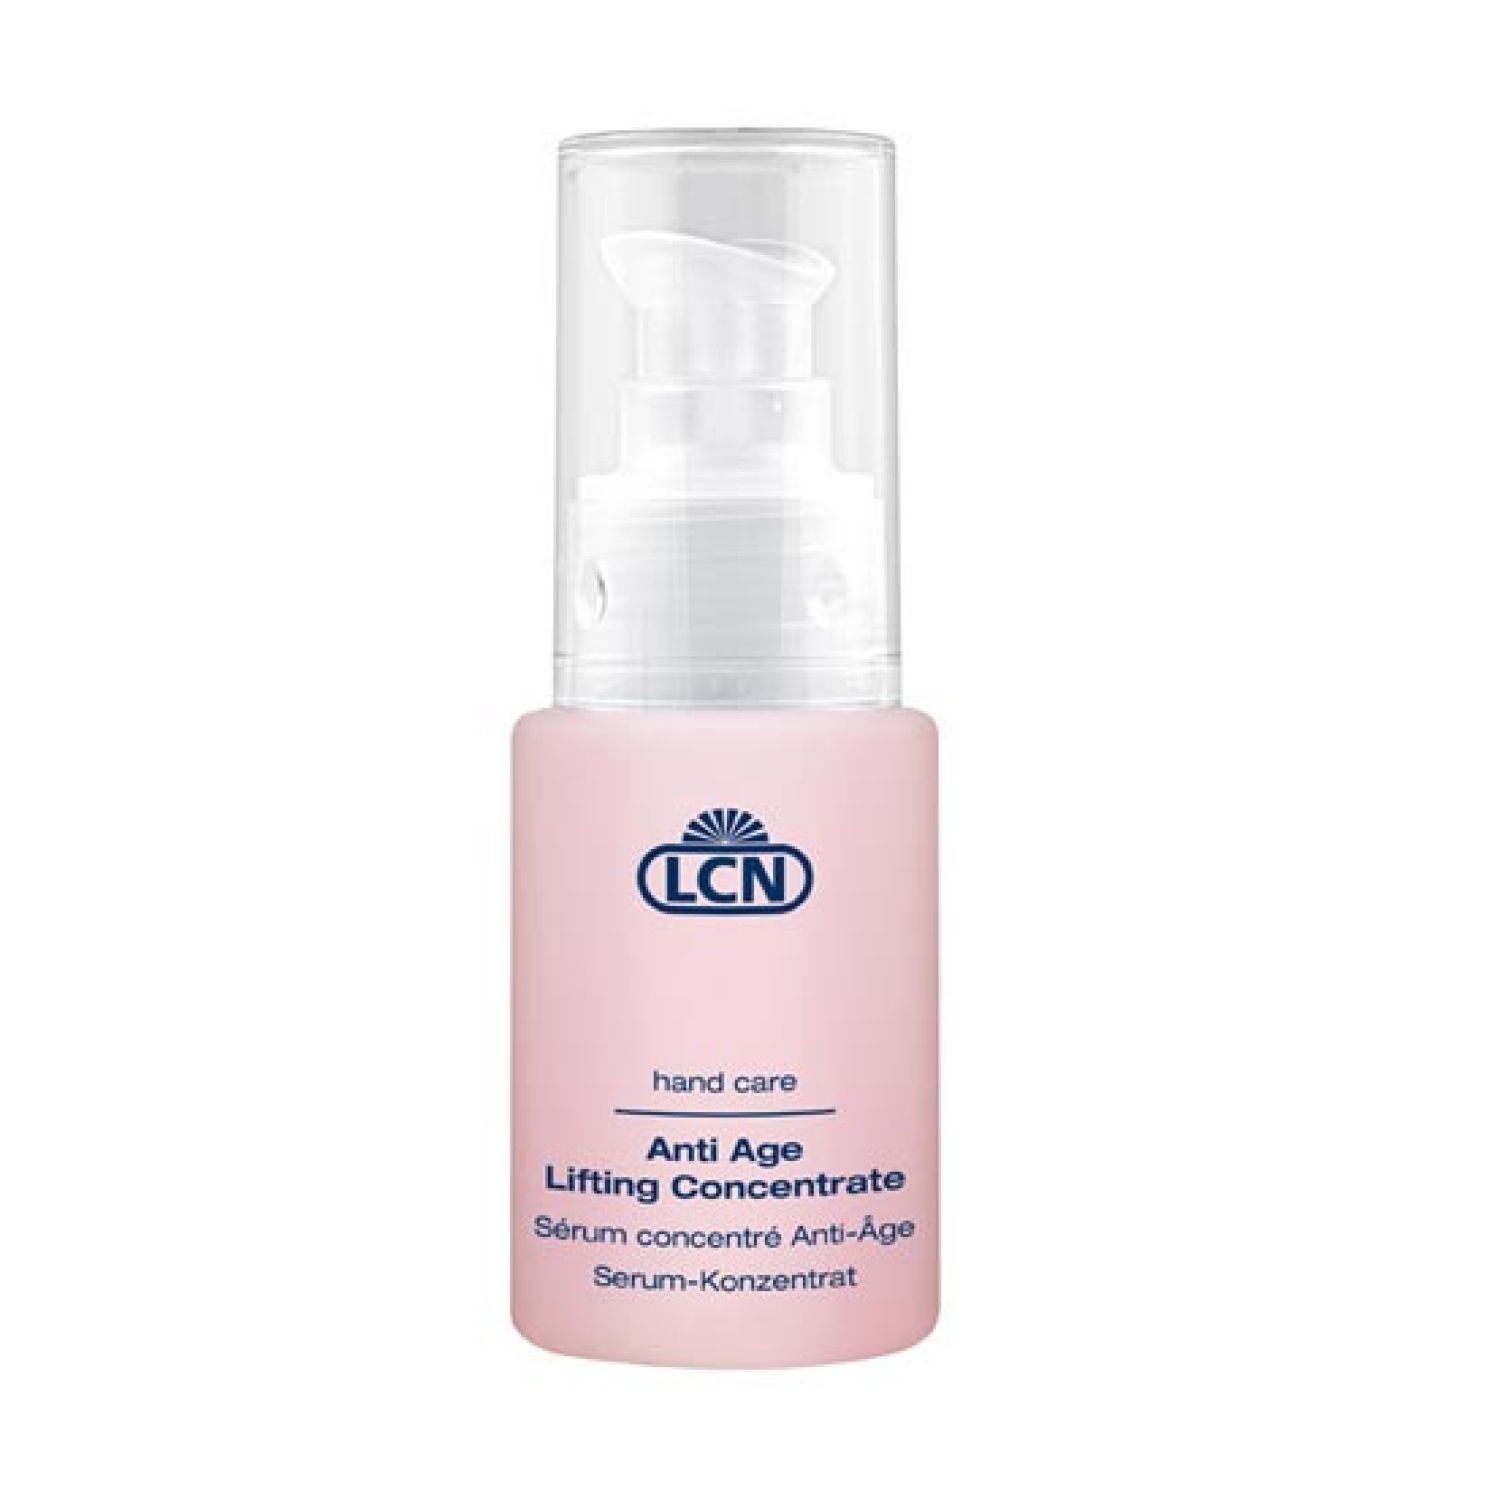 LCN Hand Care Anti Age Lifting Concentrate